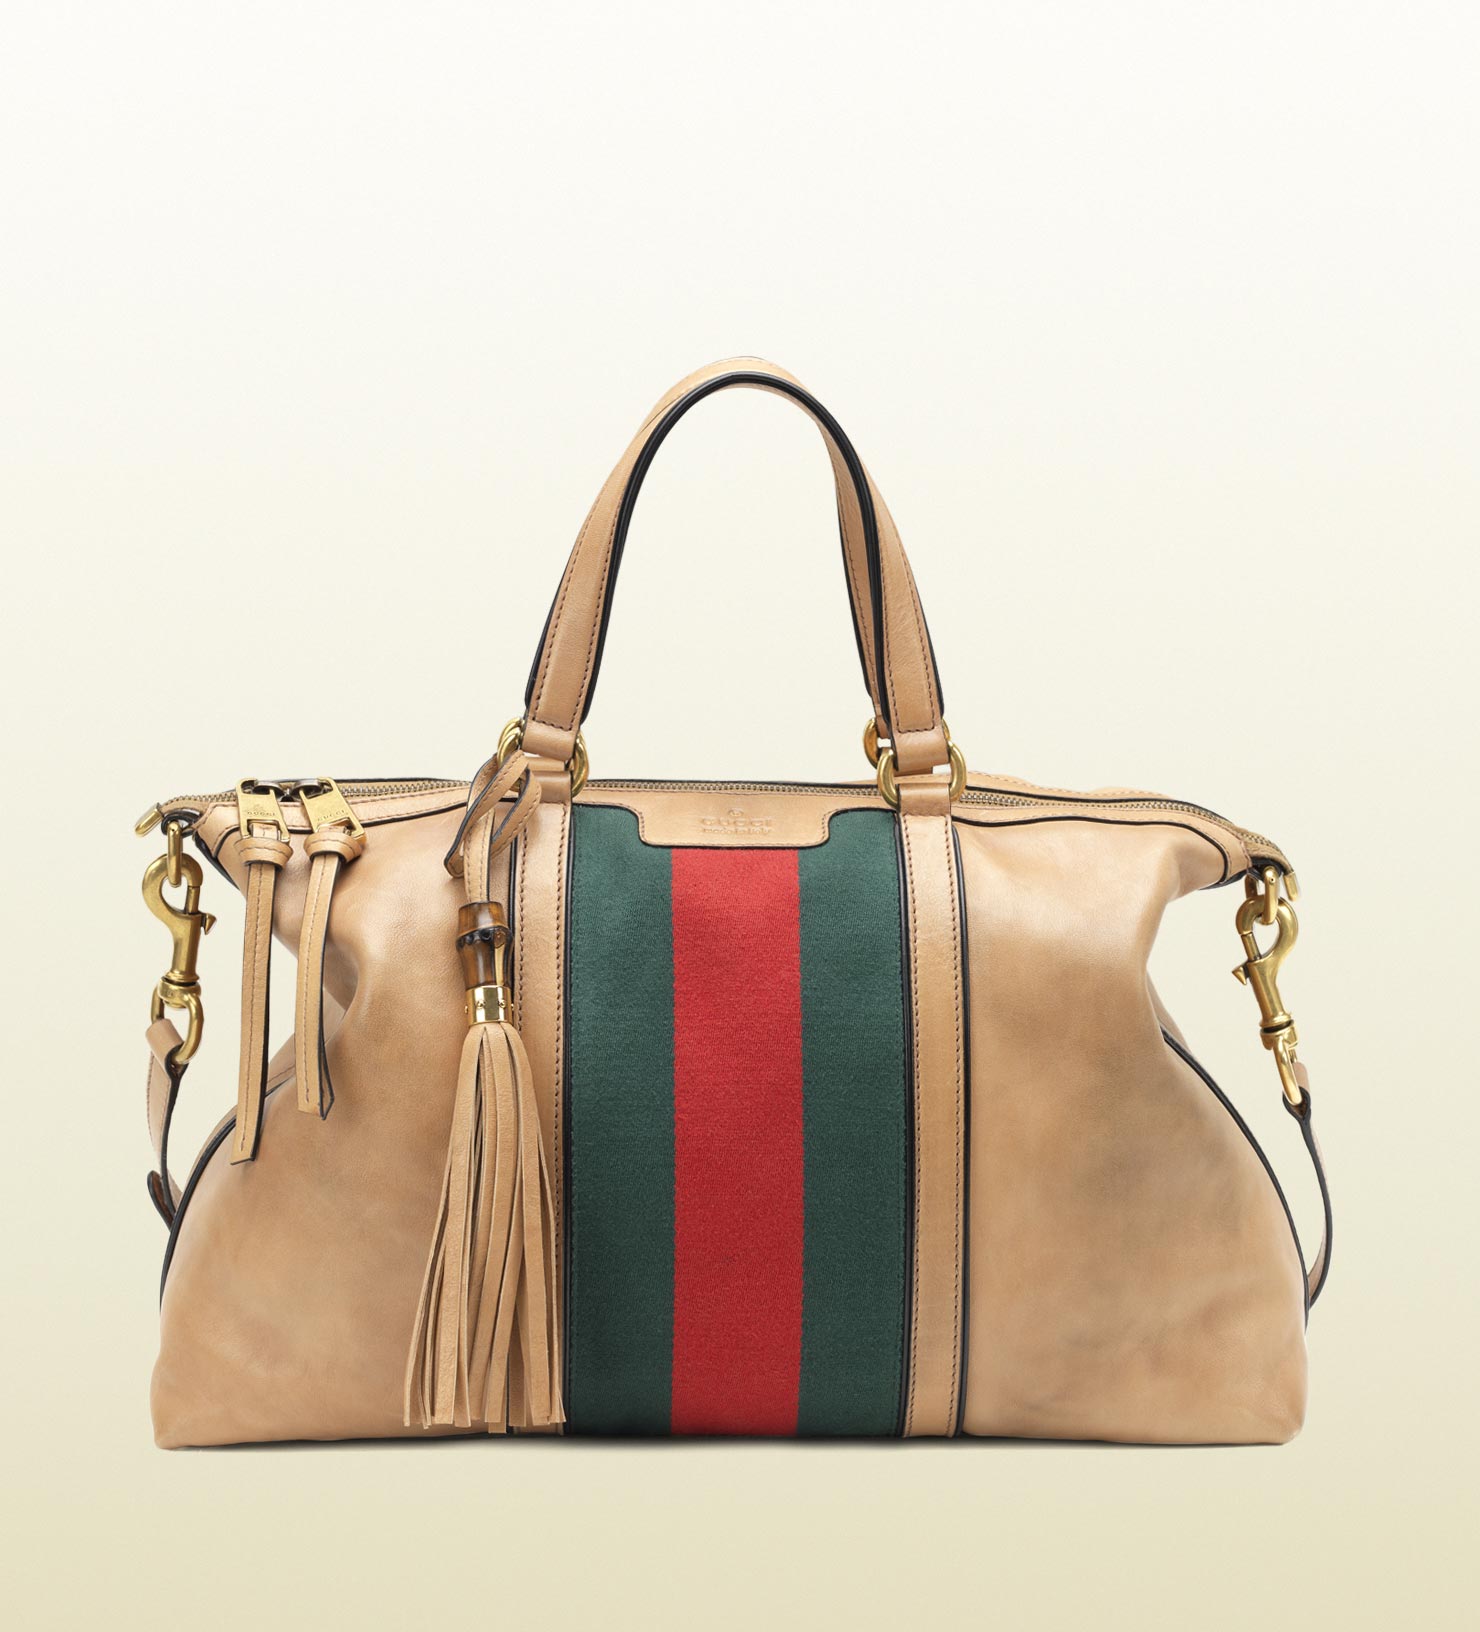 Gucci Leather Top Handle Bag in Khaki (Brown) - Lyst